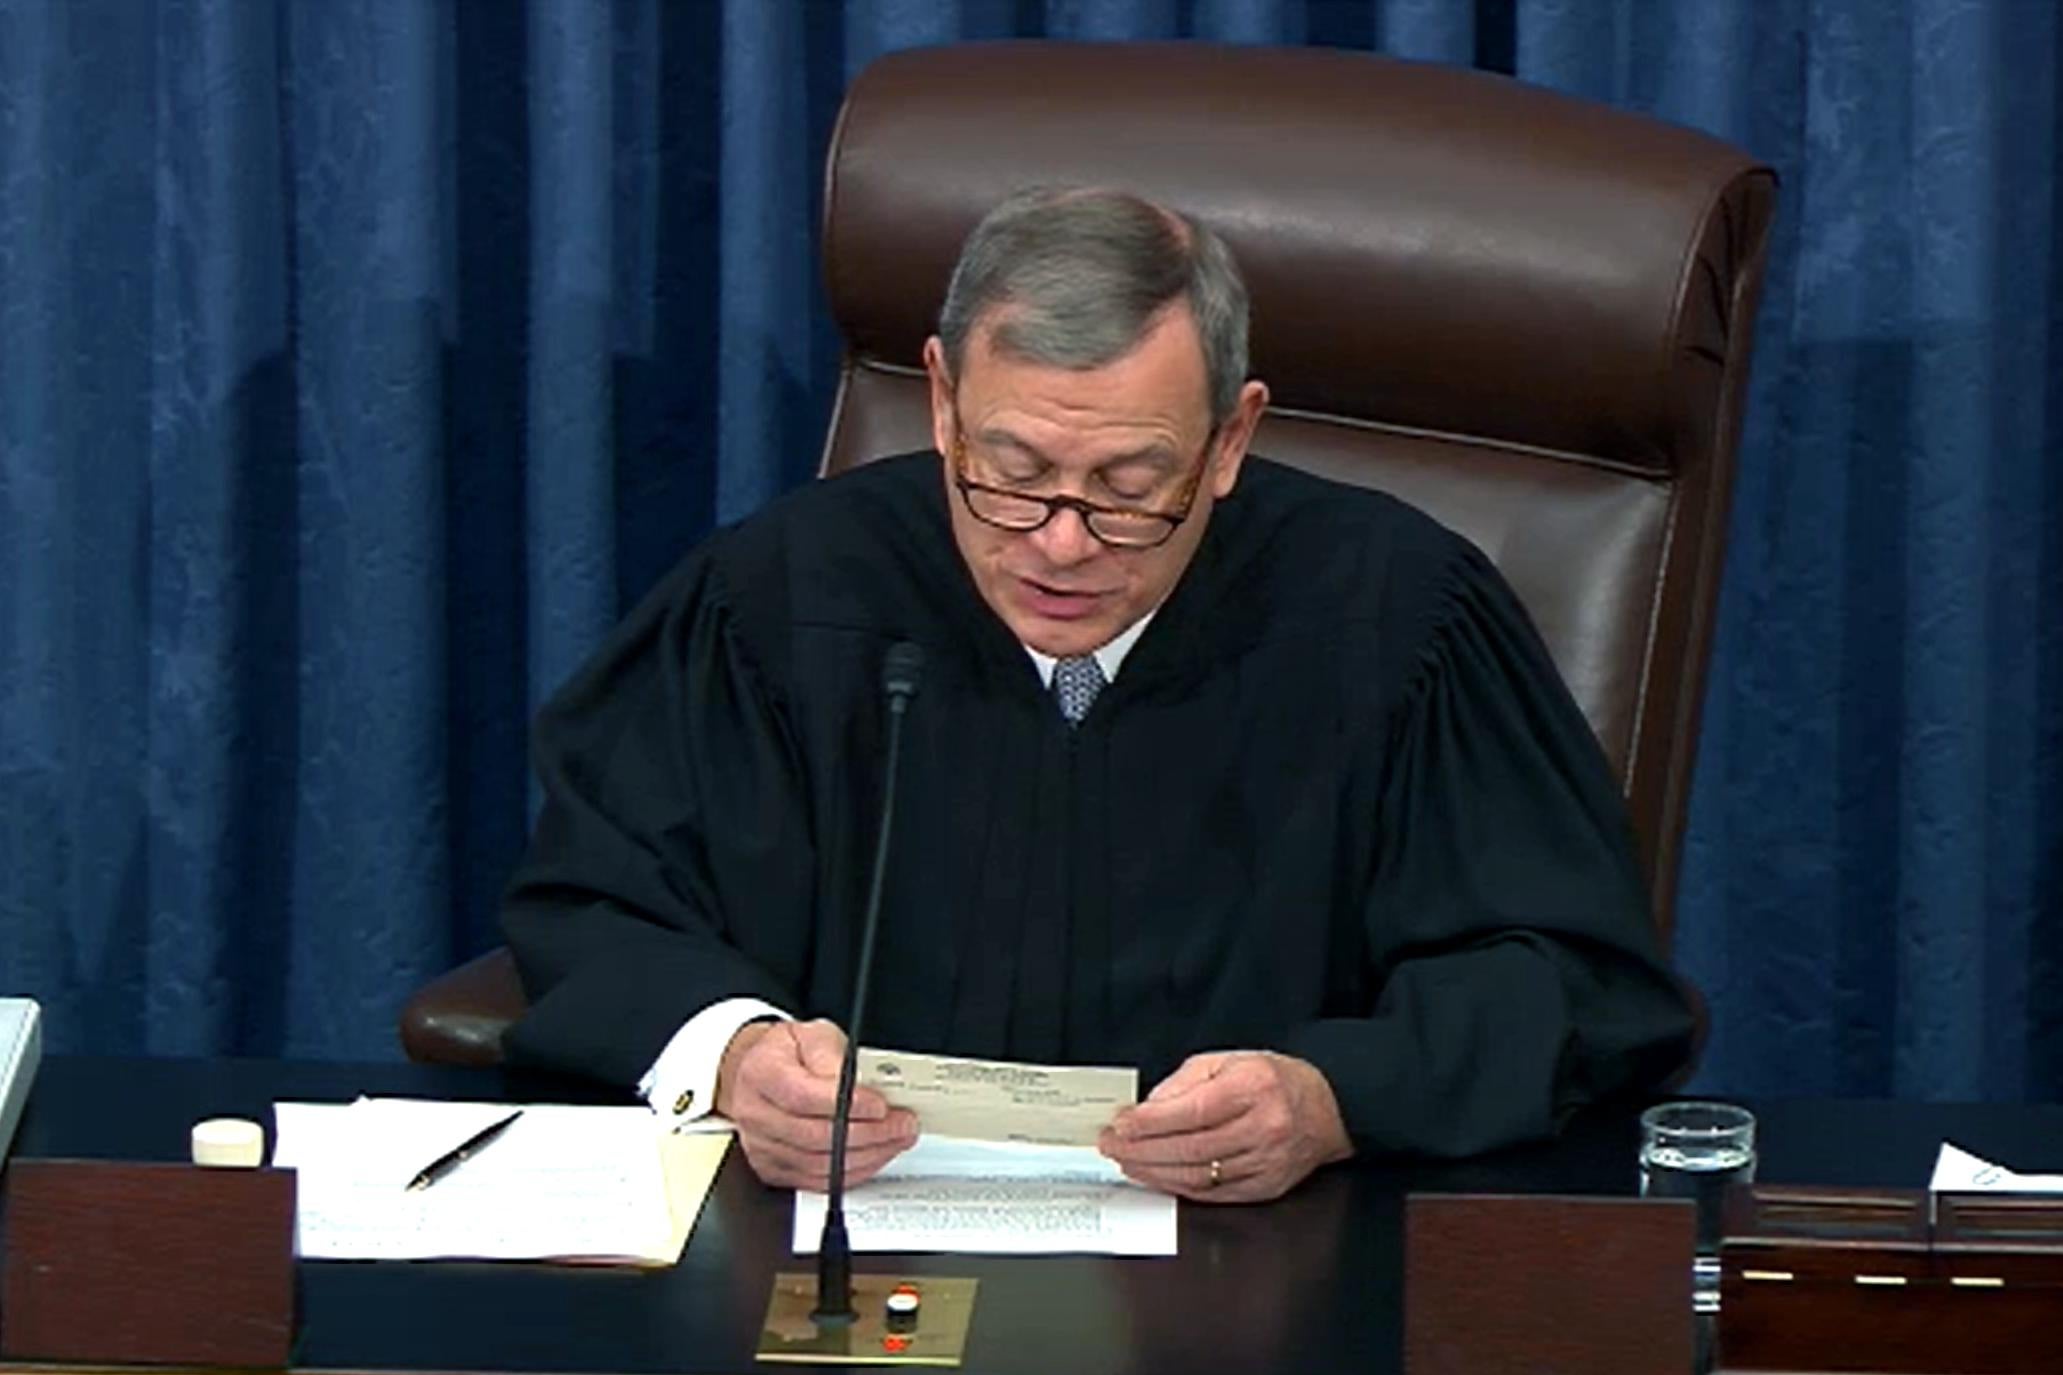 John Roberts reads a question from the chair of the Senate.